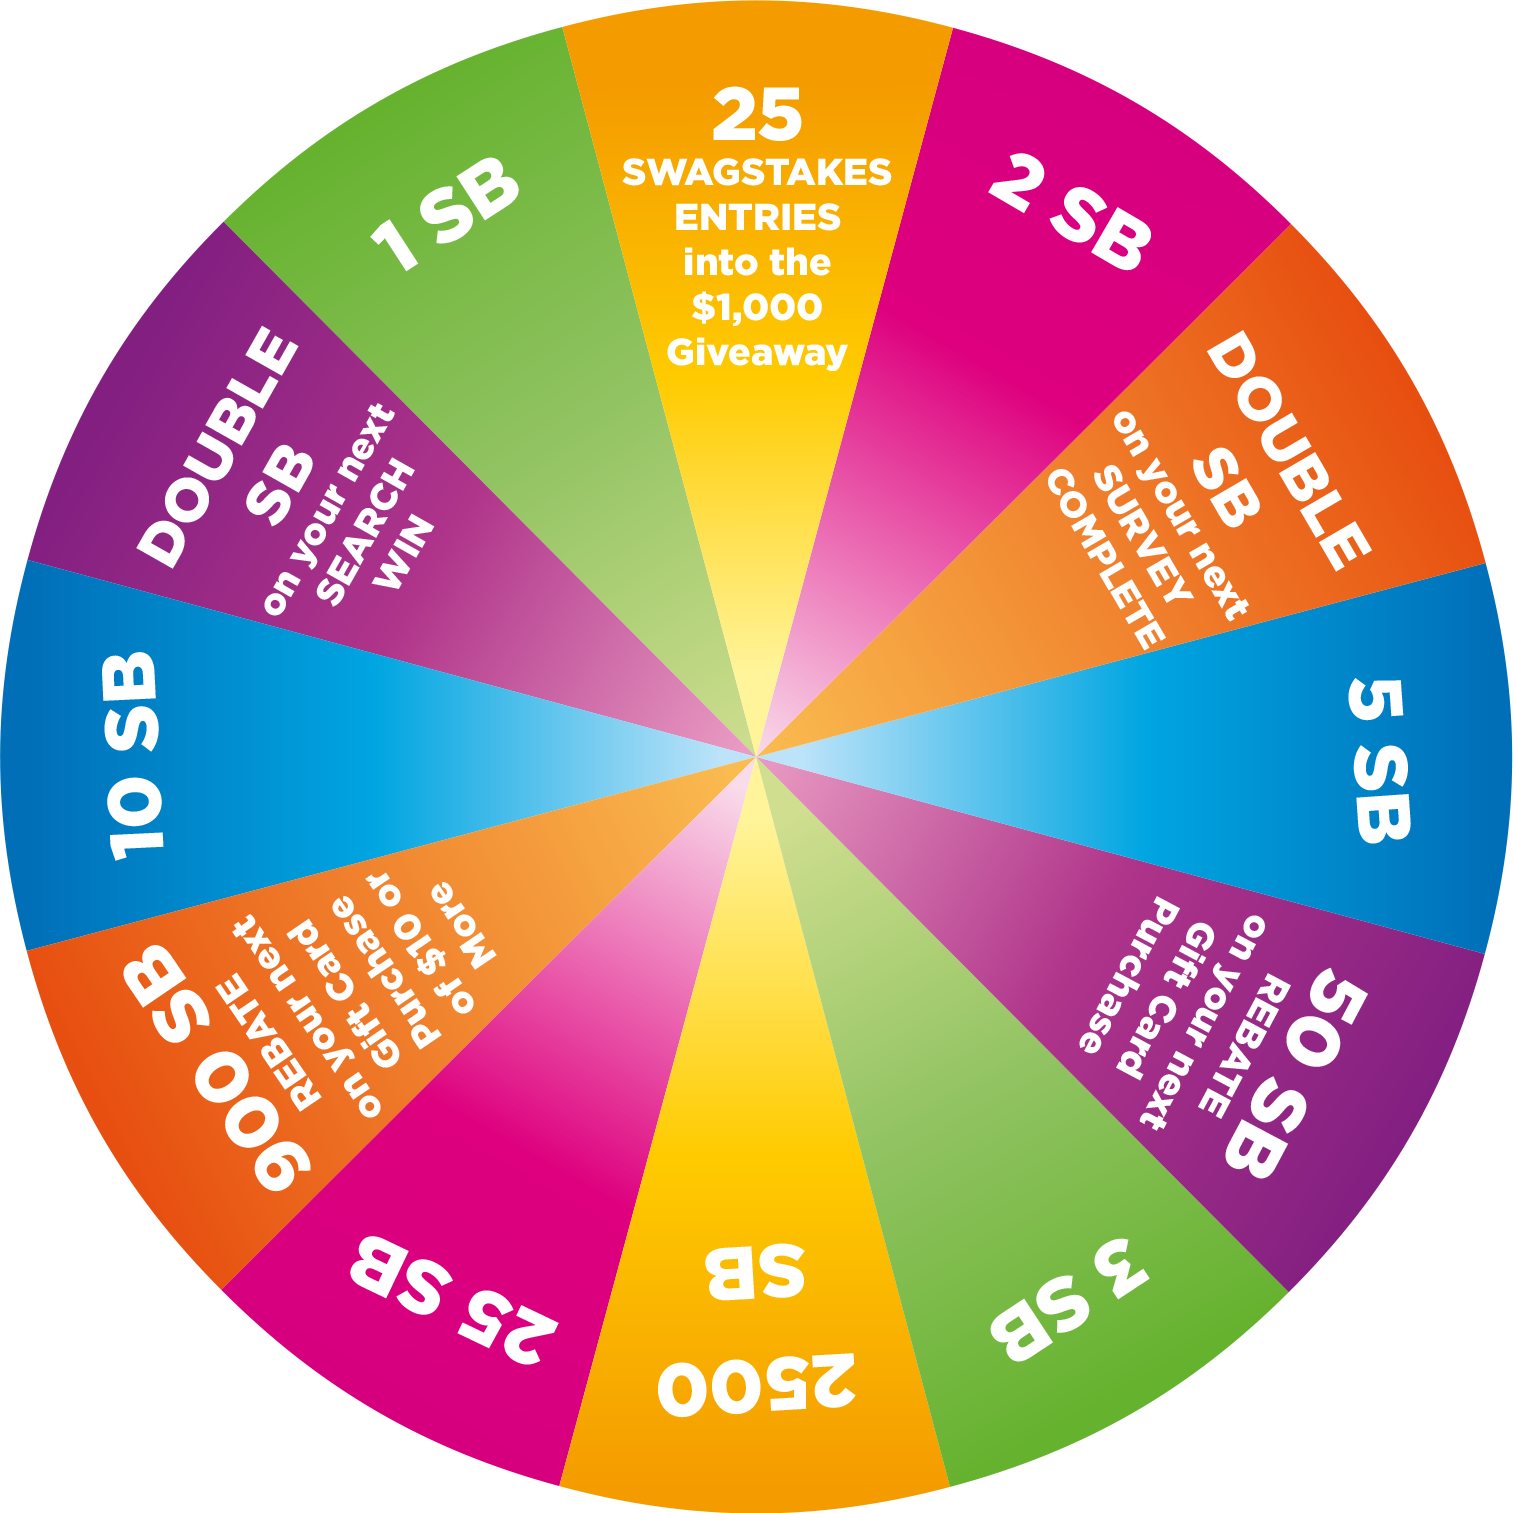 Spin & Win. Spin the wheel to win SB and other awards.